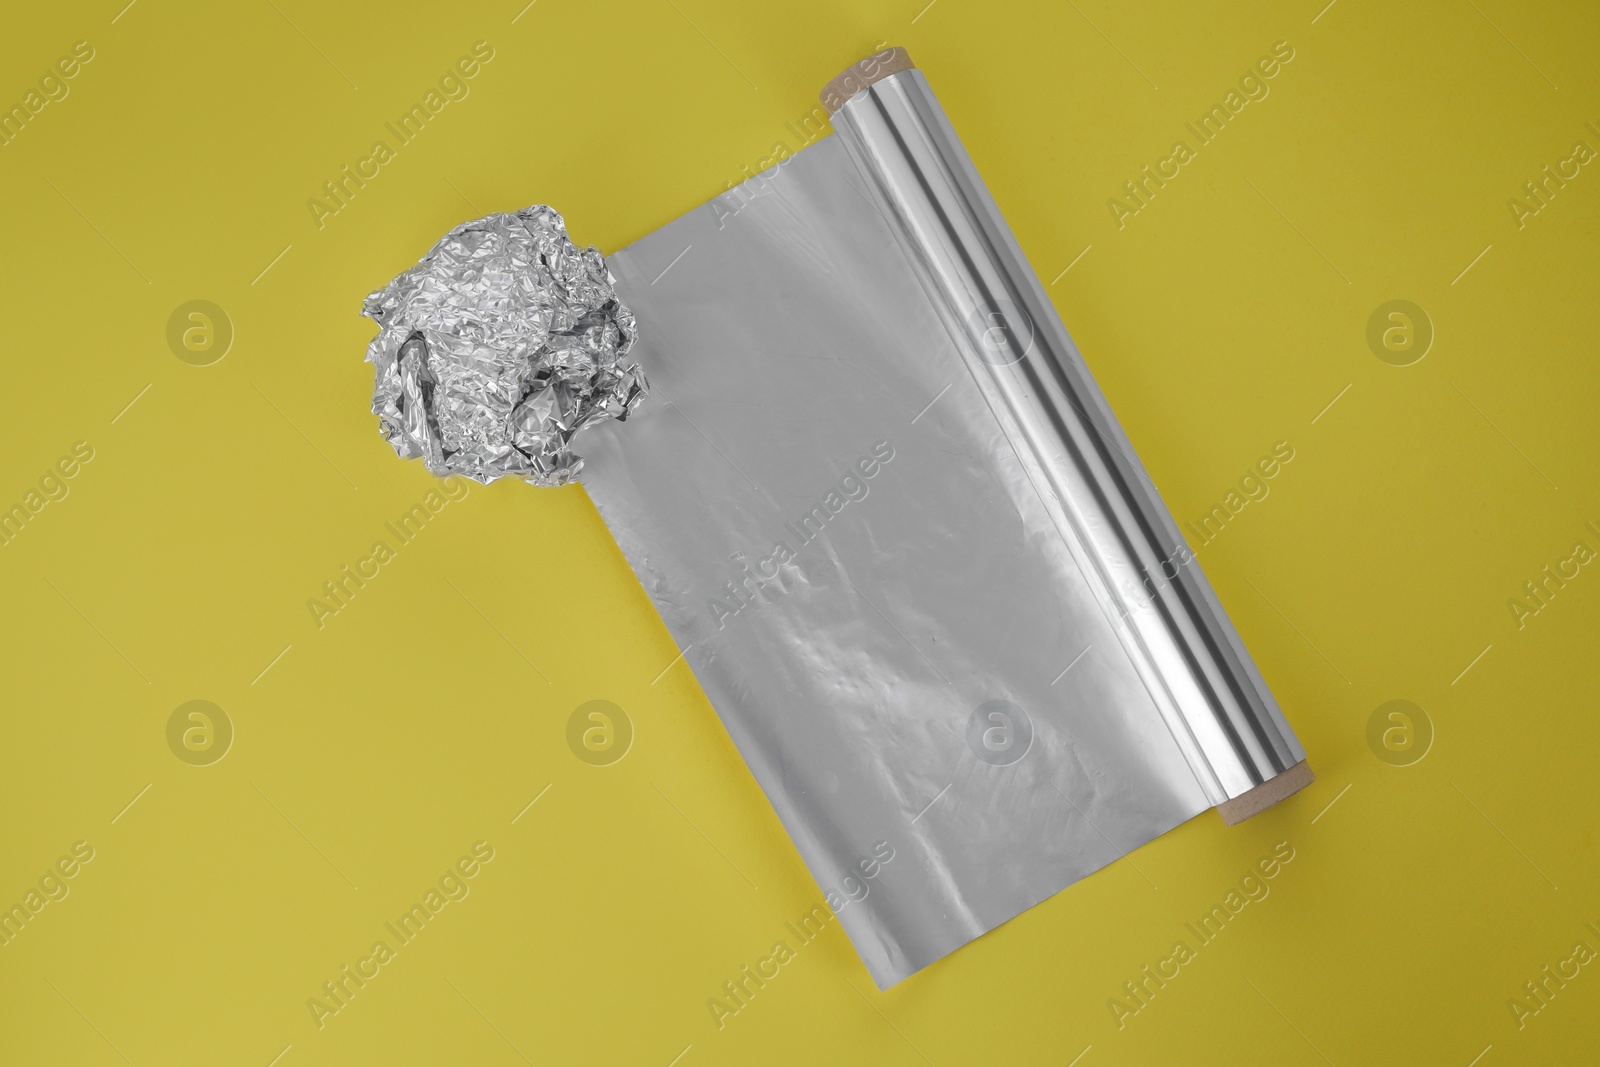 Photo of Roll of aluminum foil and crumpled ball on yellow background, top view